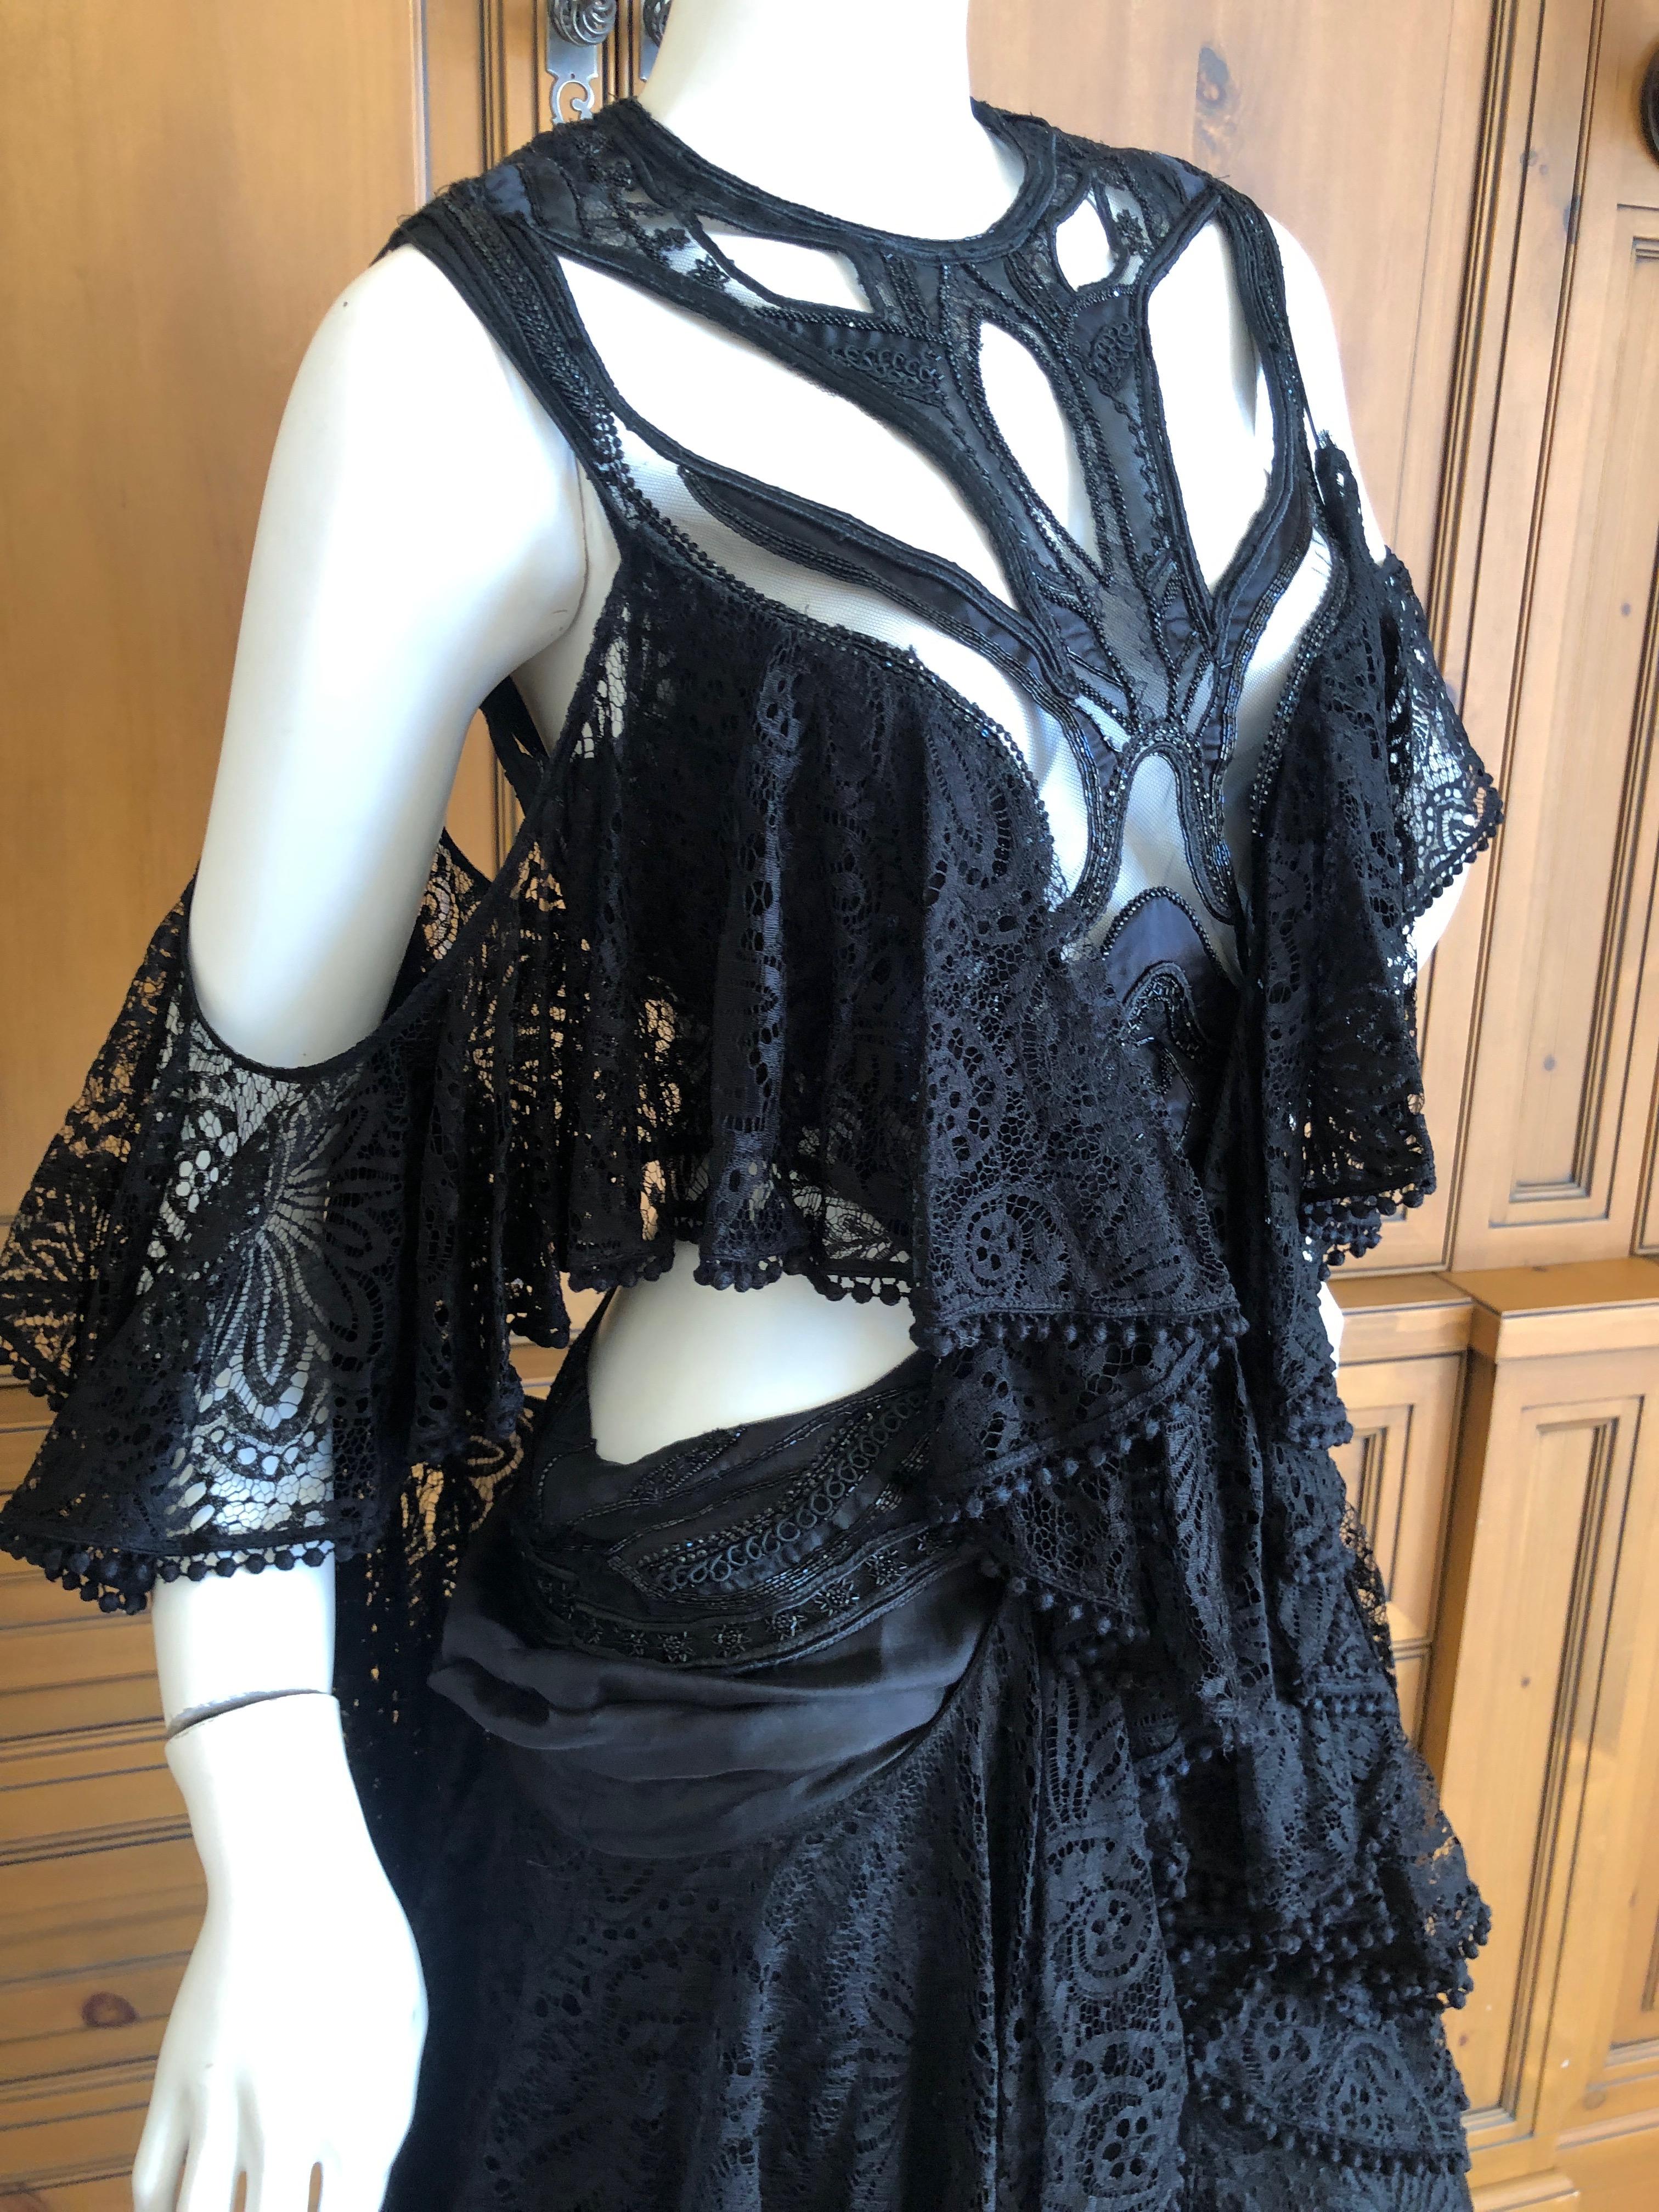 Women's Alexander McQueen Pre Fall 2018 Goth Black Lace Beaded Dress by Sarah Burton For Sale